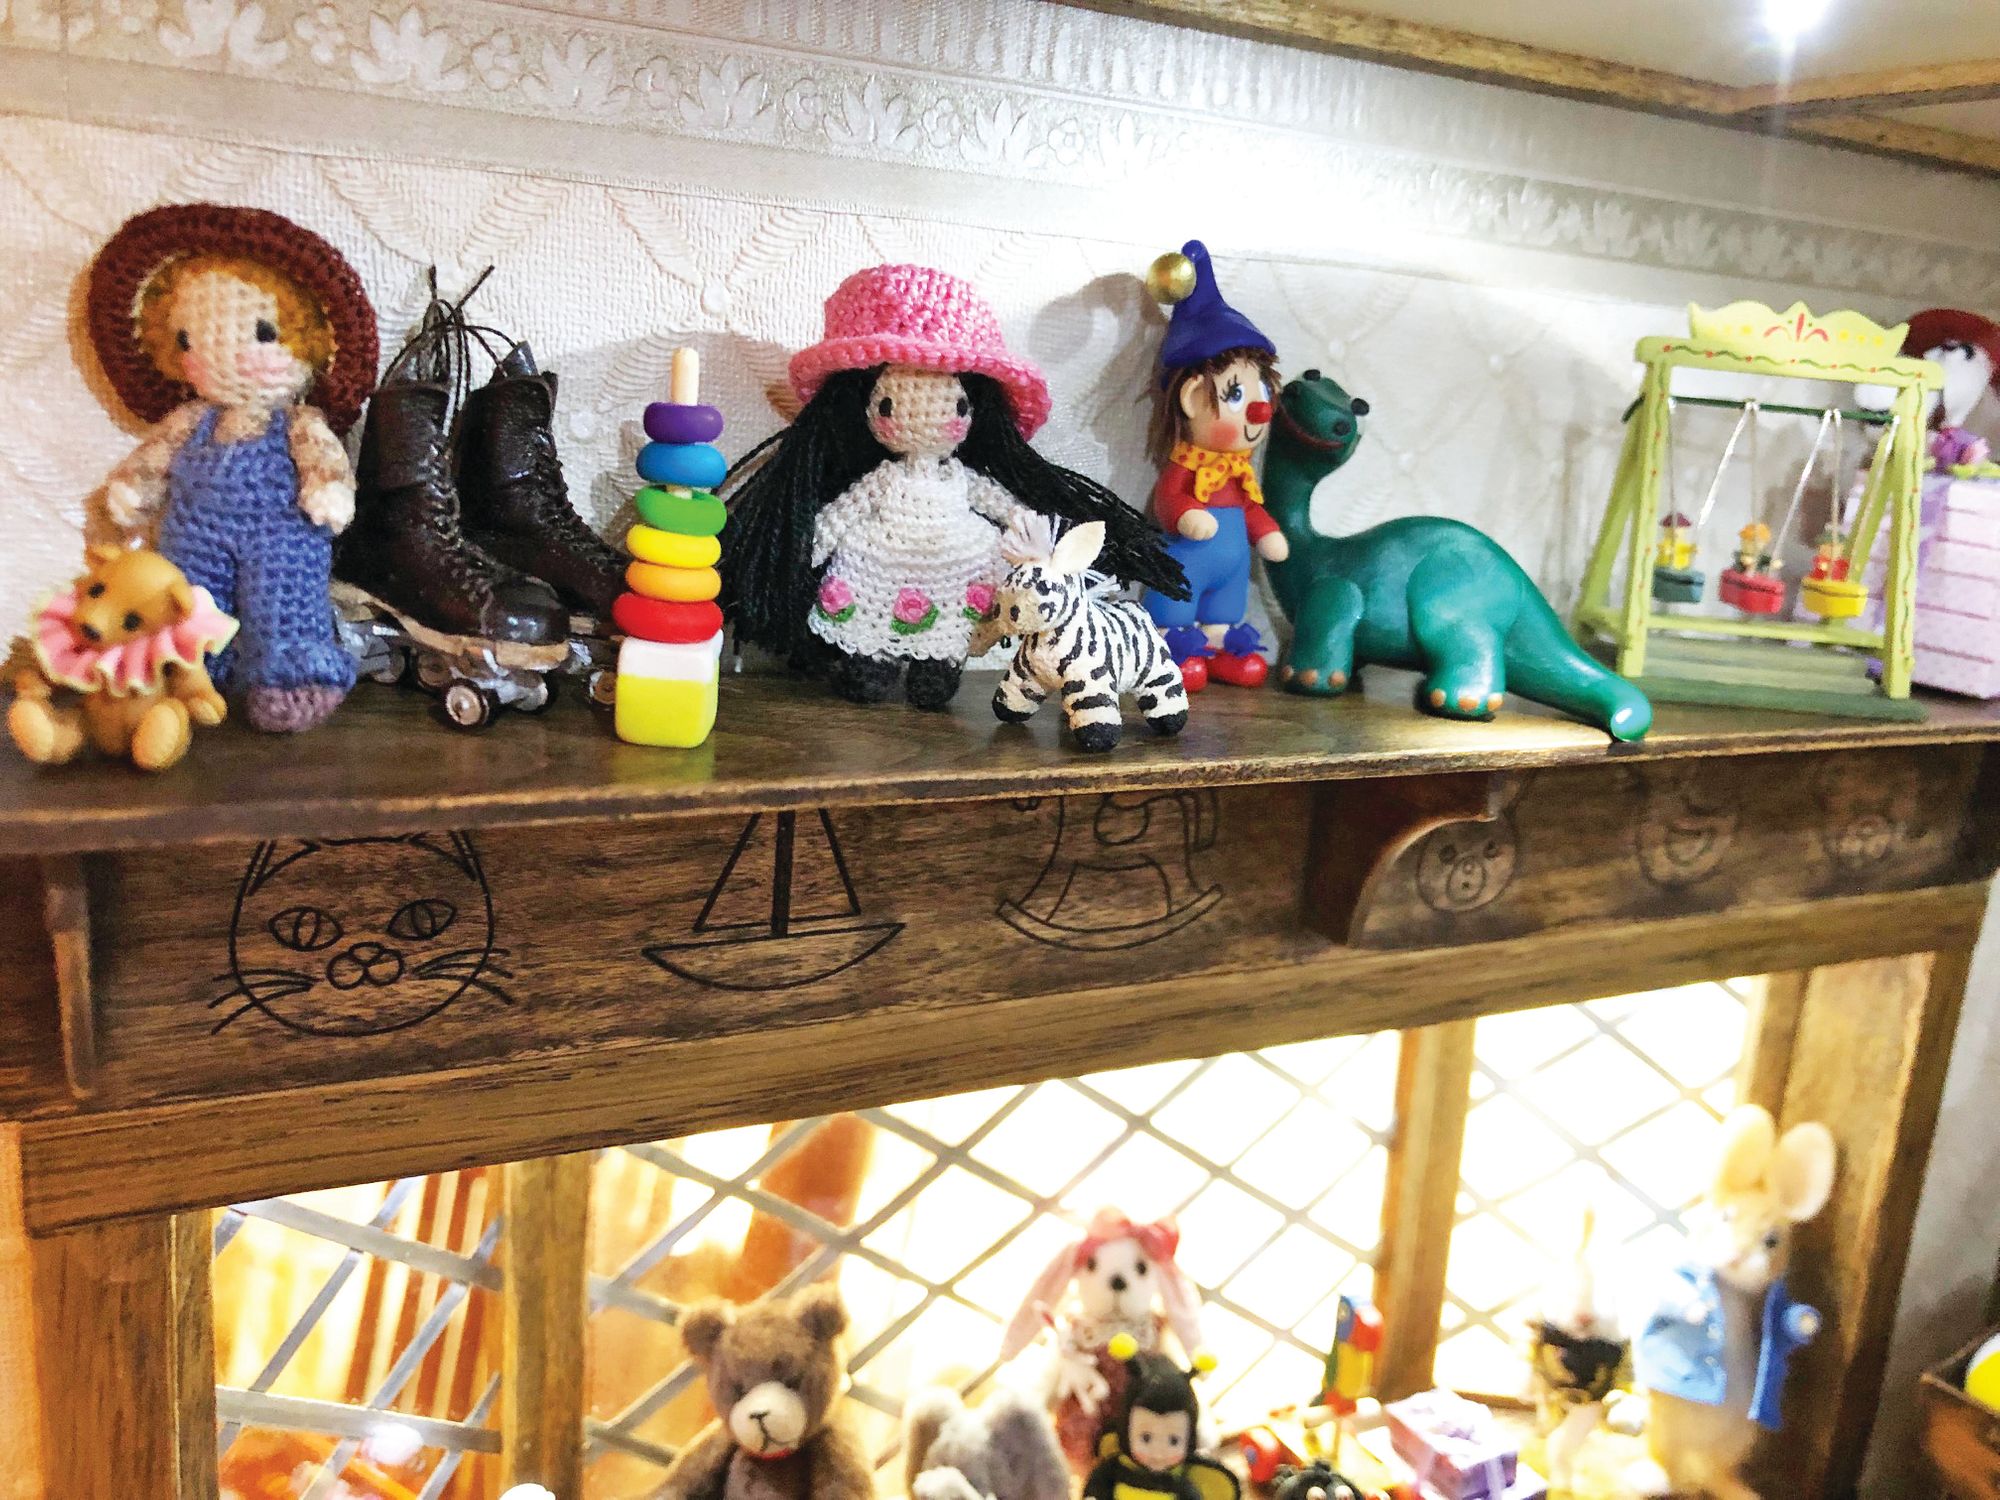 Toy shop full of imaginary friends